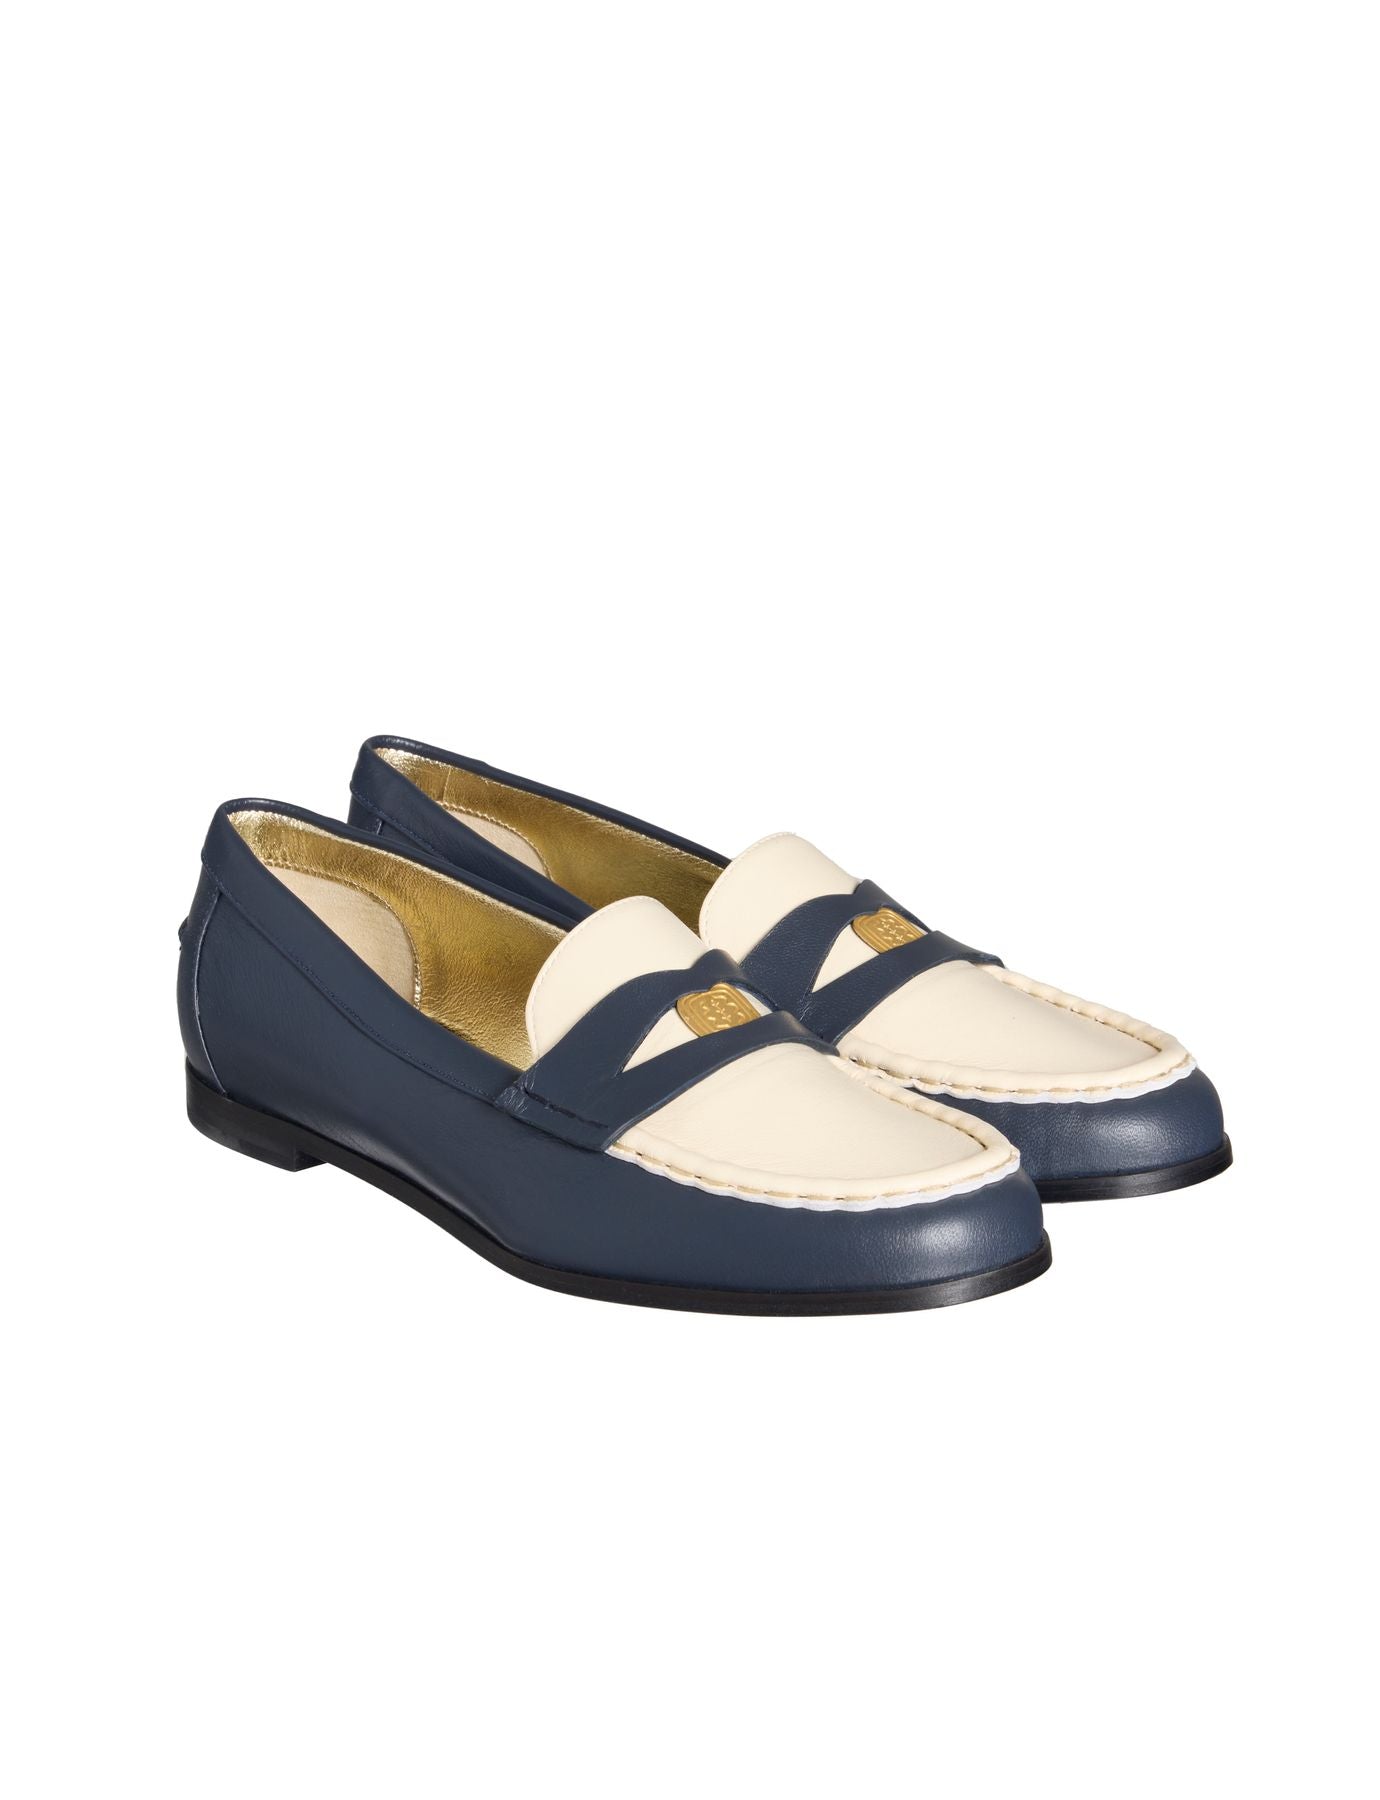 moccasin-elvire-leather-navy-and-beige